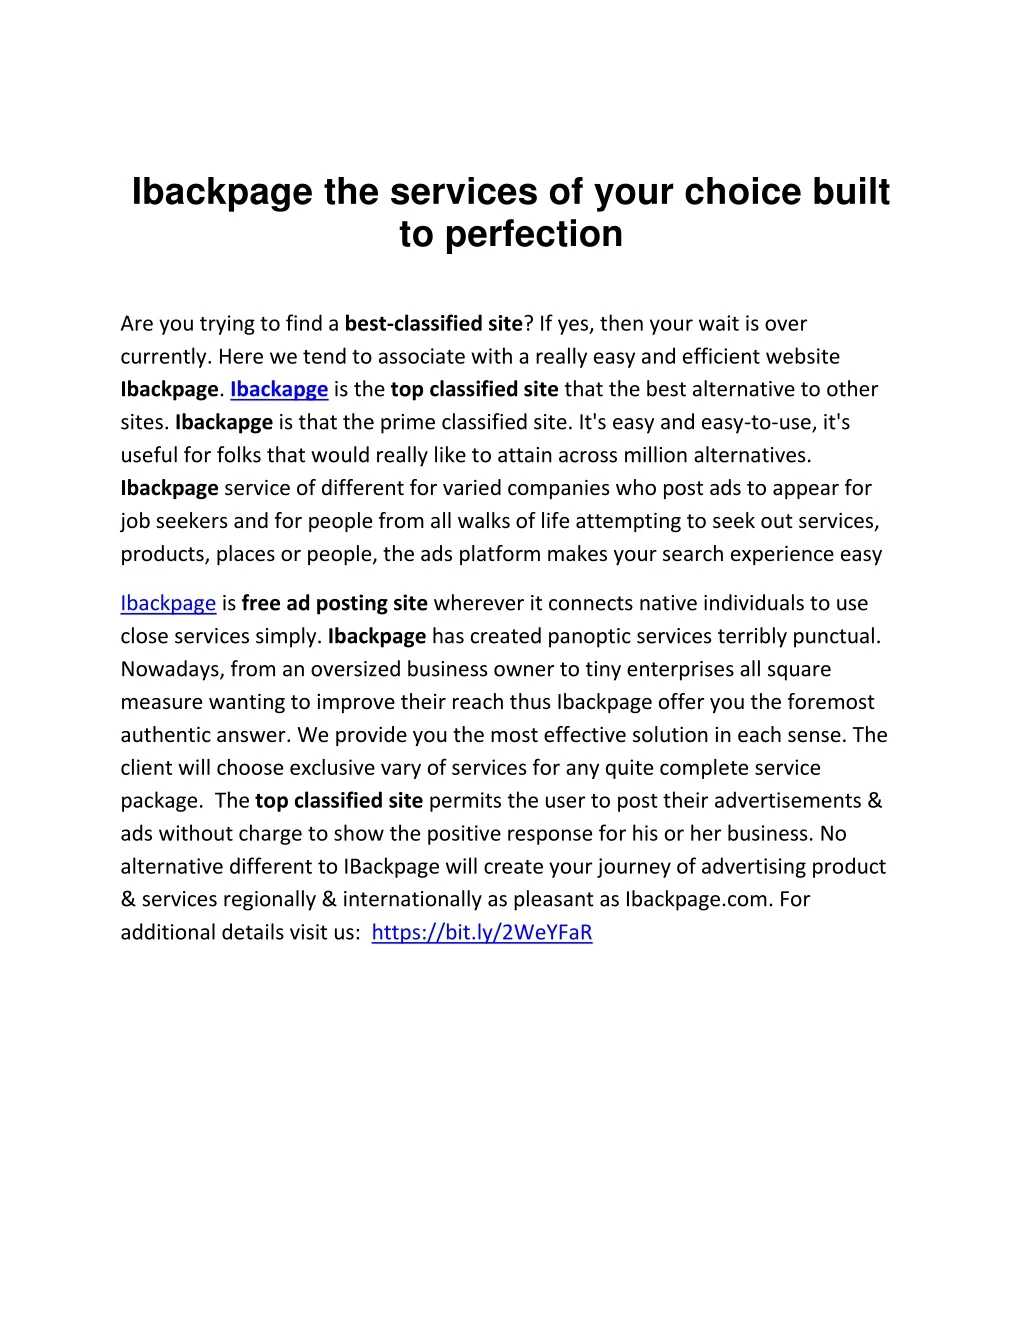 ibackpage the services of your choice built